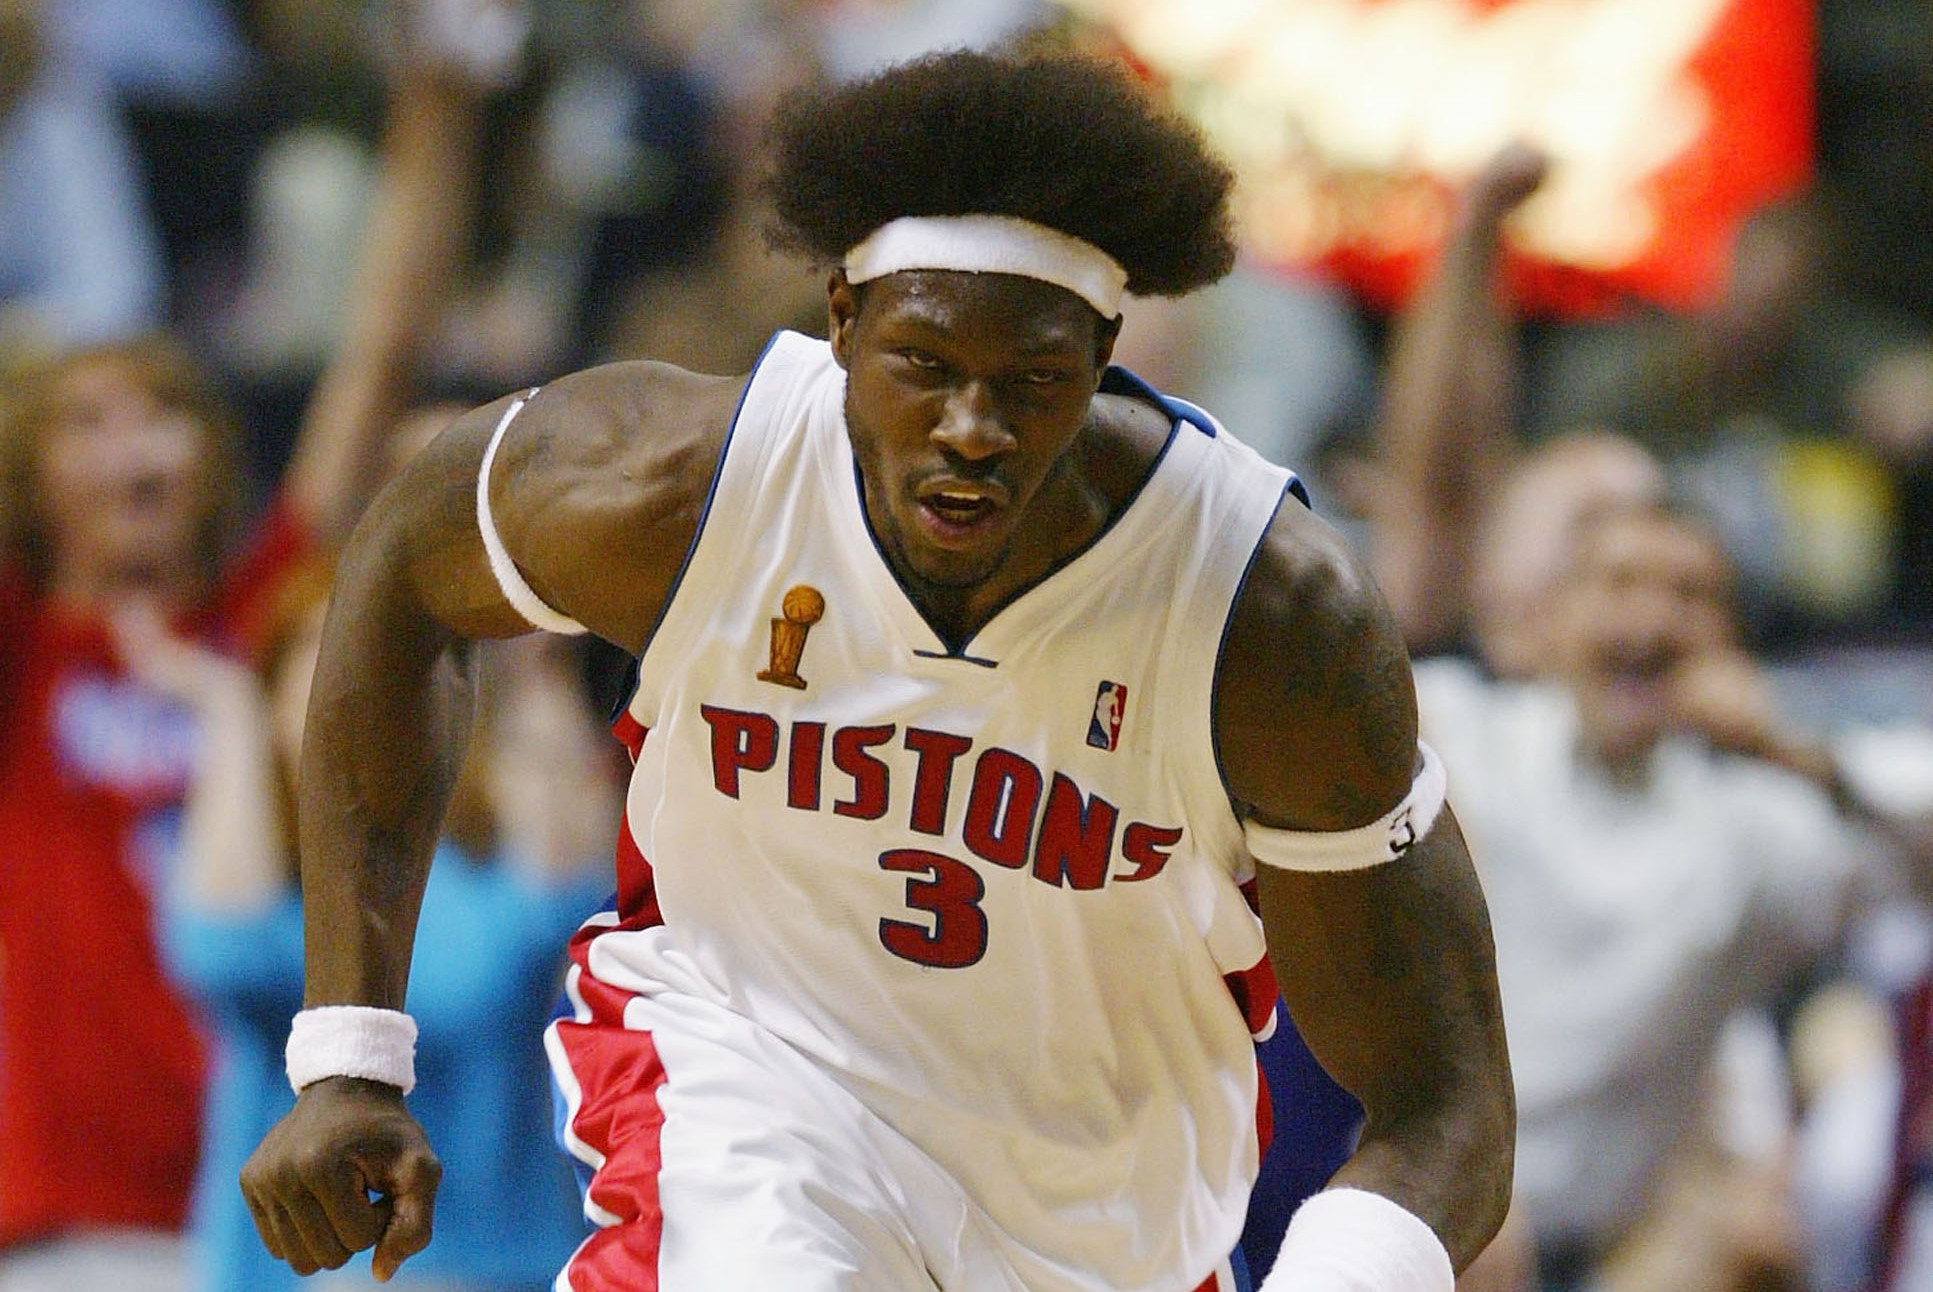 Ben Wallace averaged 9.9 rebounds, 1.9 blocks and 1.4 steals per